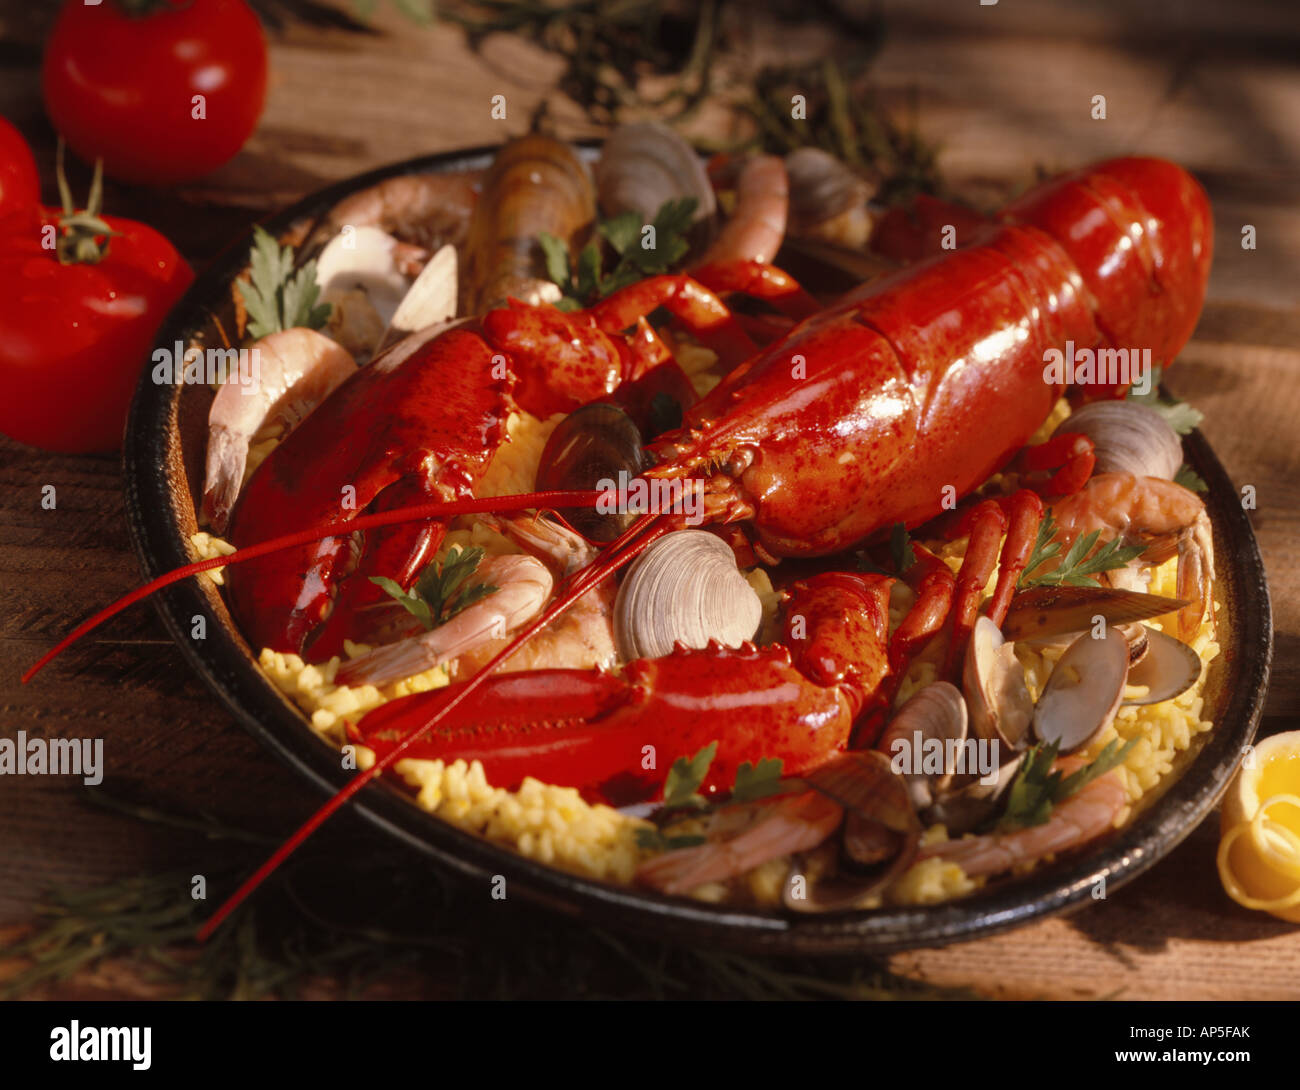 Lobster Paella with Lobster shrimps clams mussels and yellow saffron rice Stock Photo